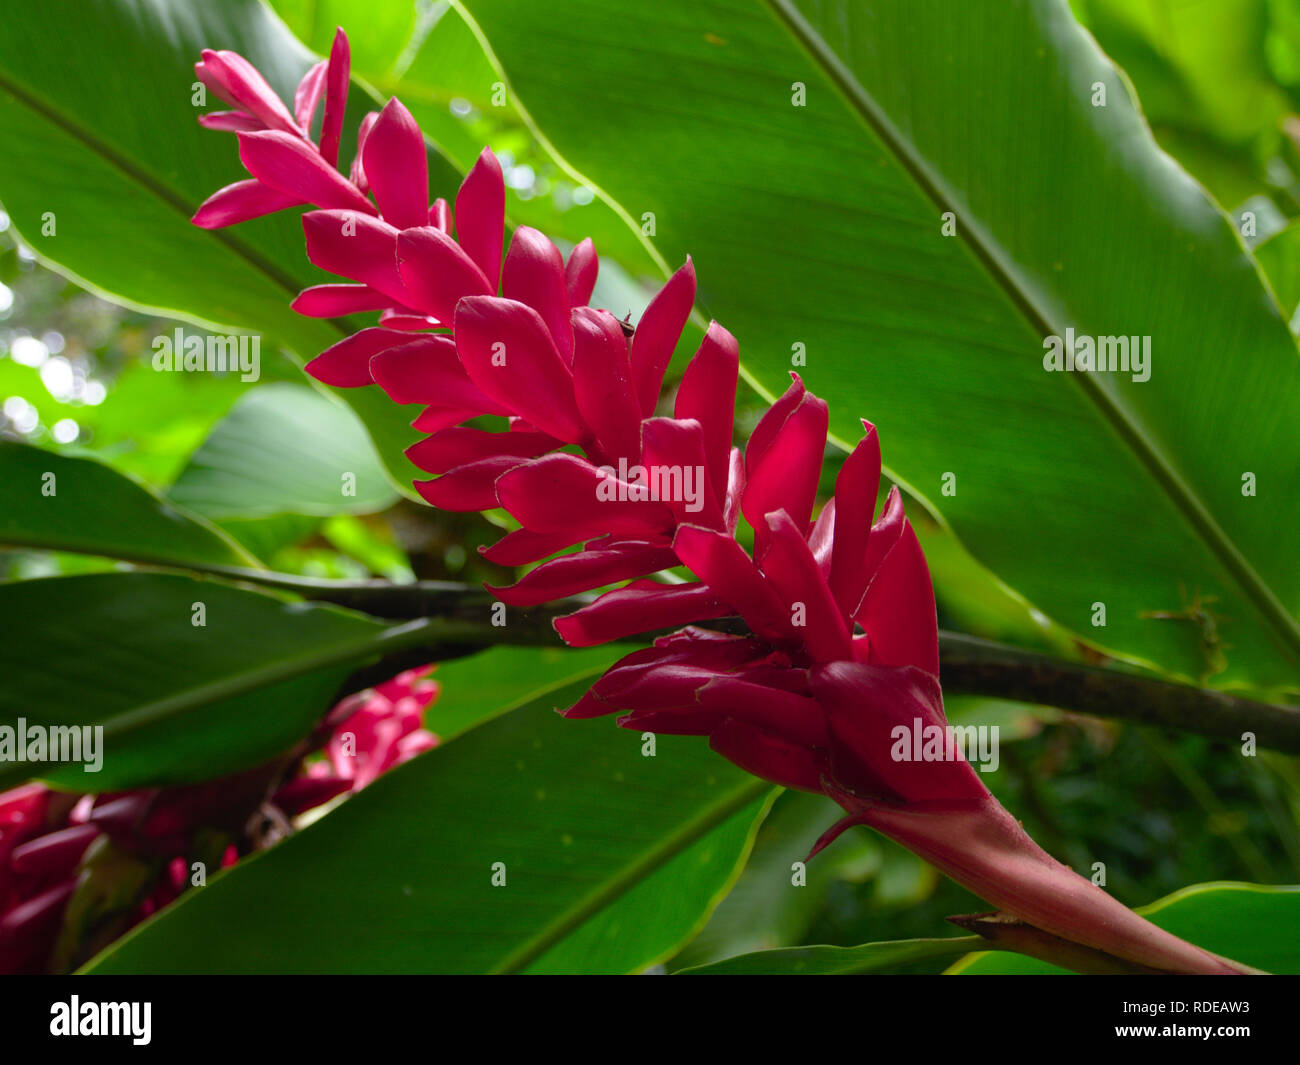 Ginger Lily High Resolution Stock Photography And Images Alamy